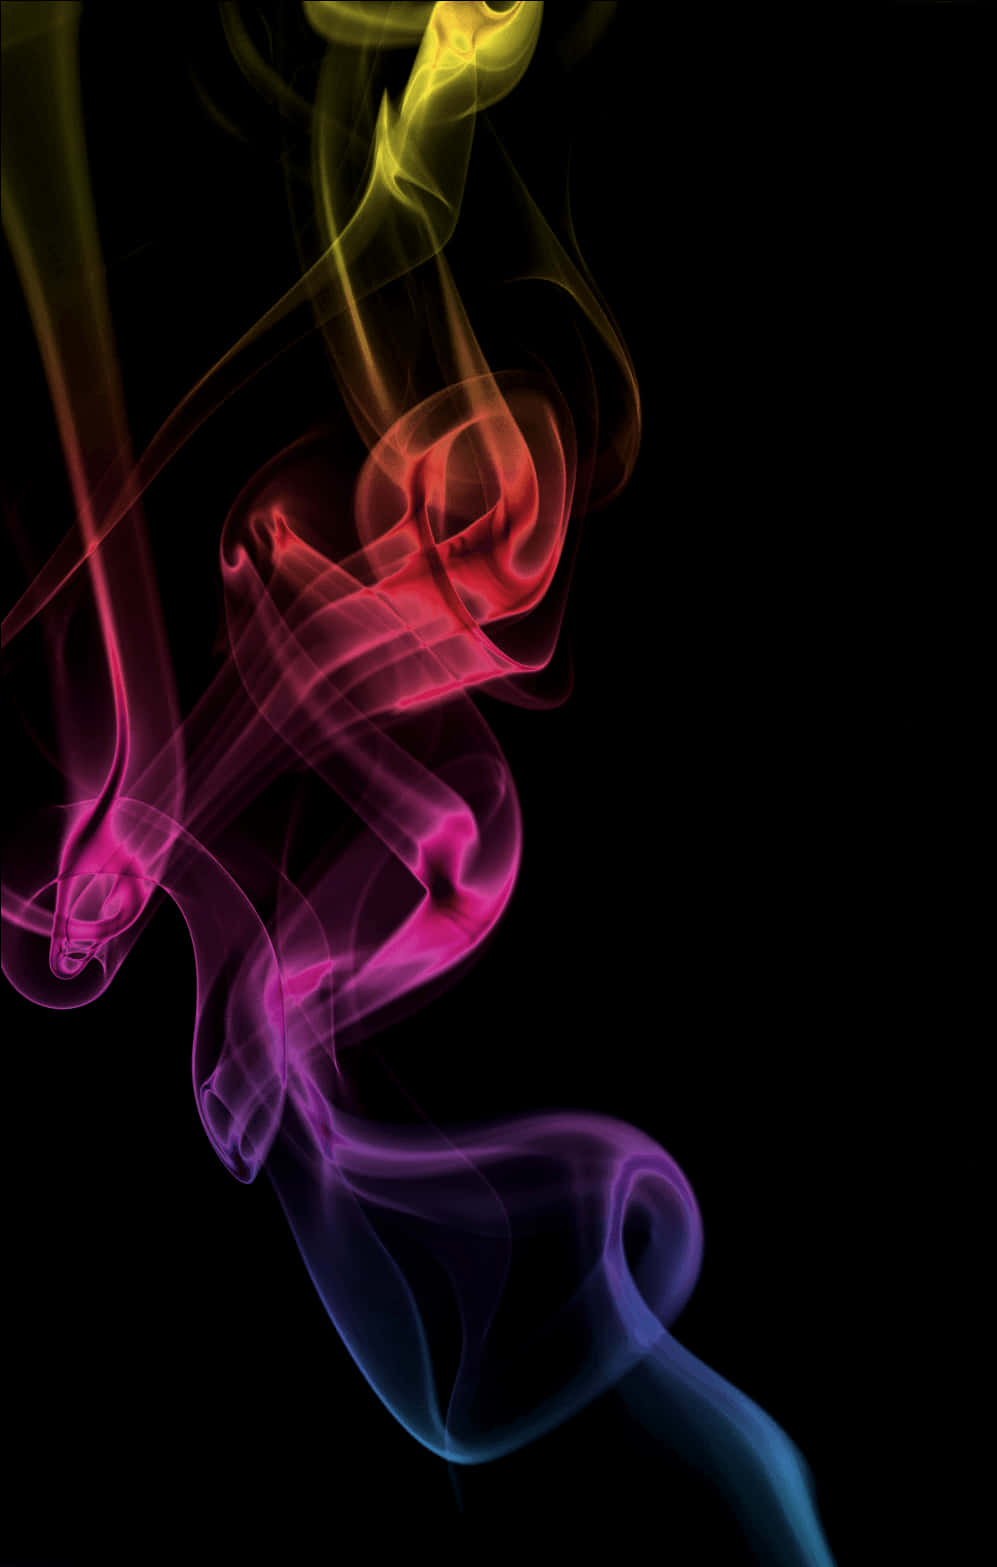 Yellow, Blue, And Red Smoke Effect